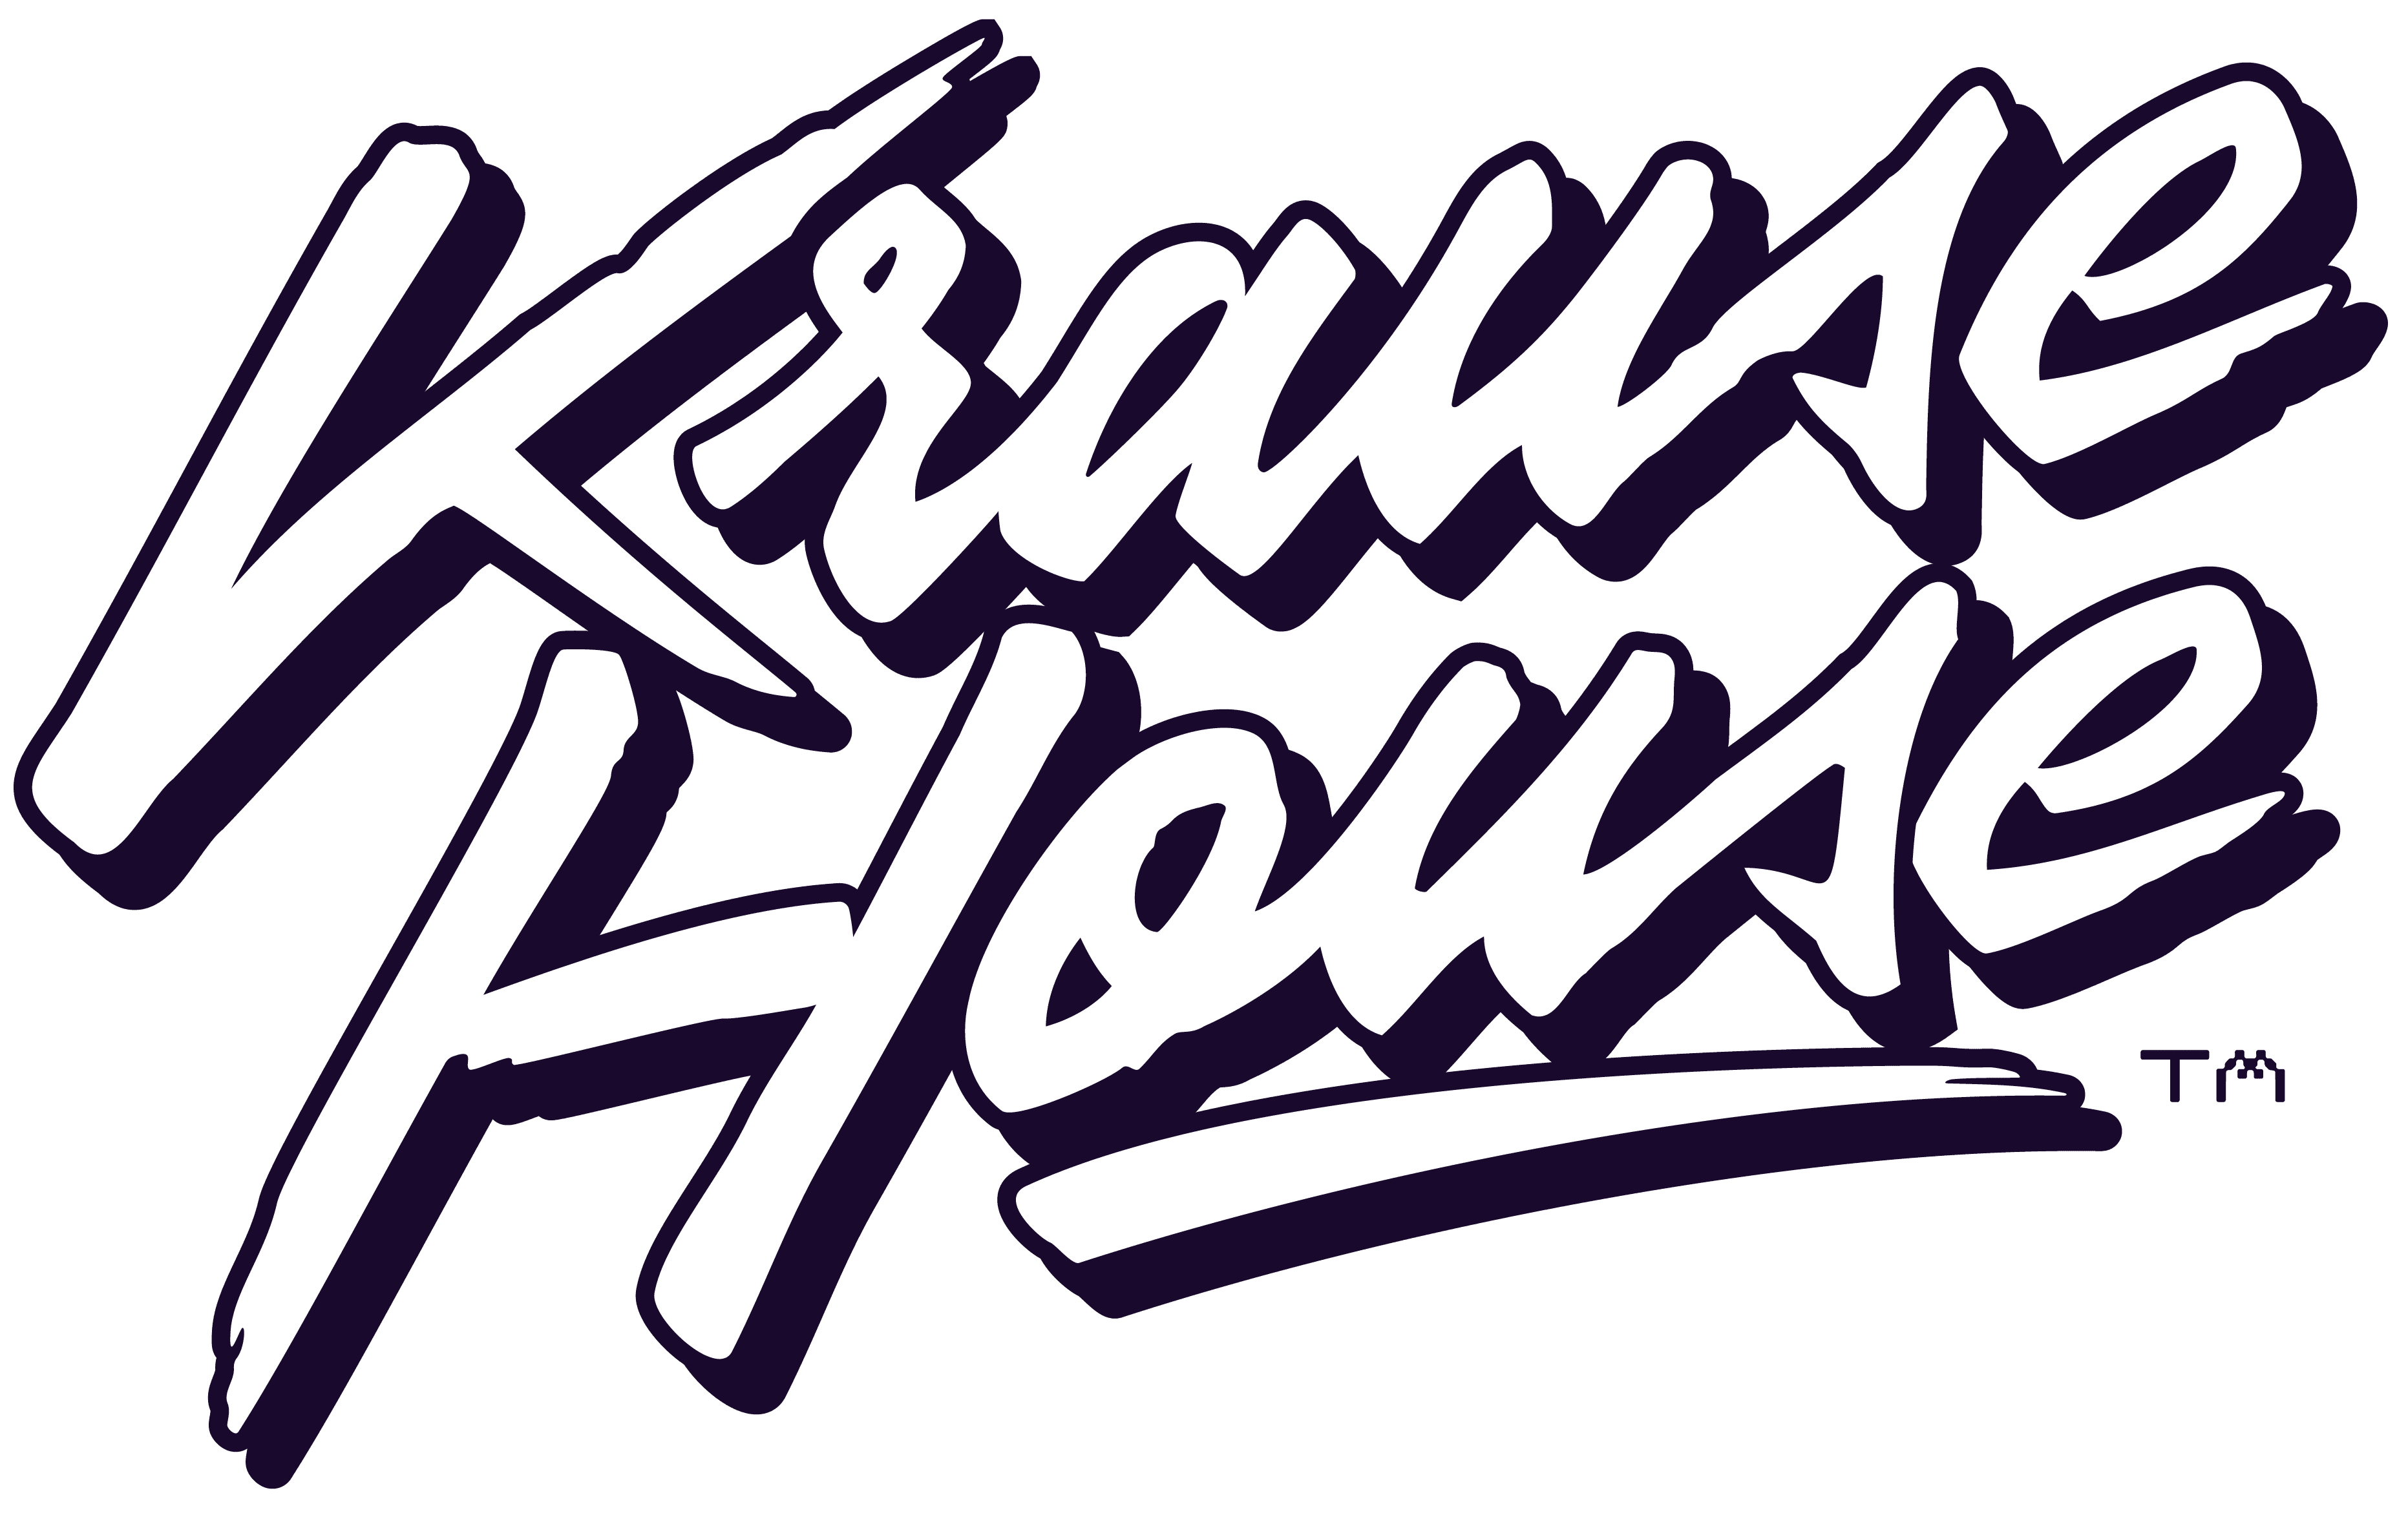 Krause House Tickets